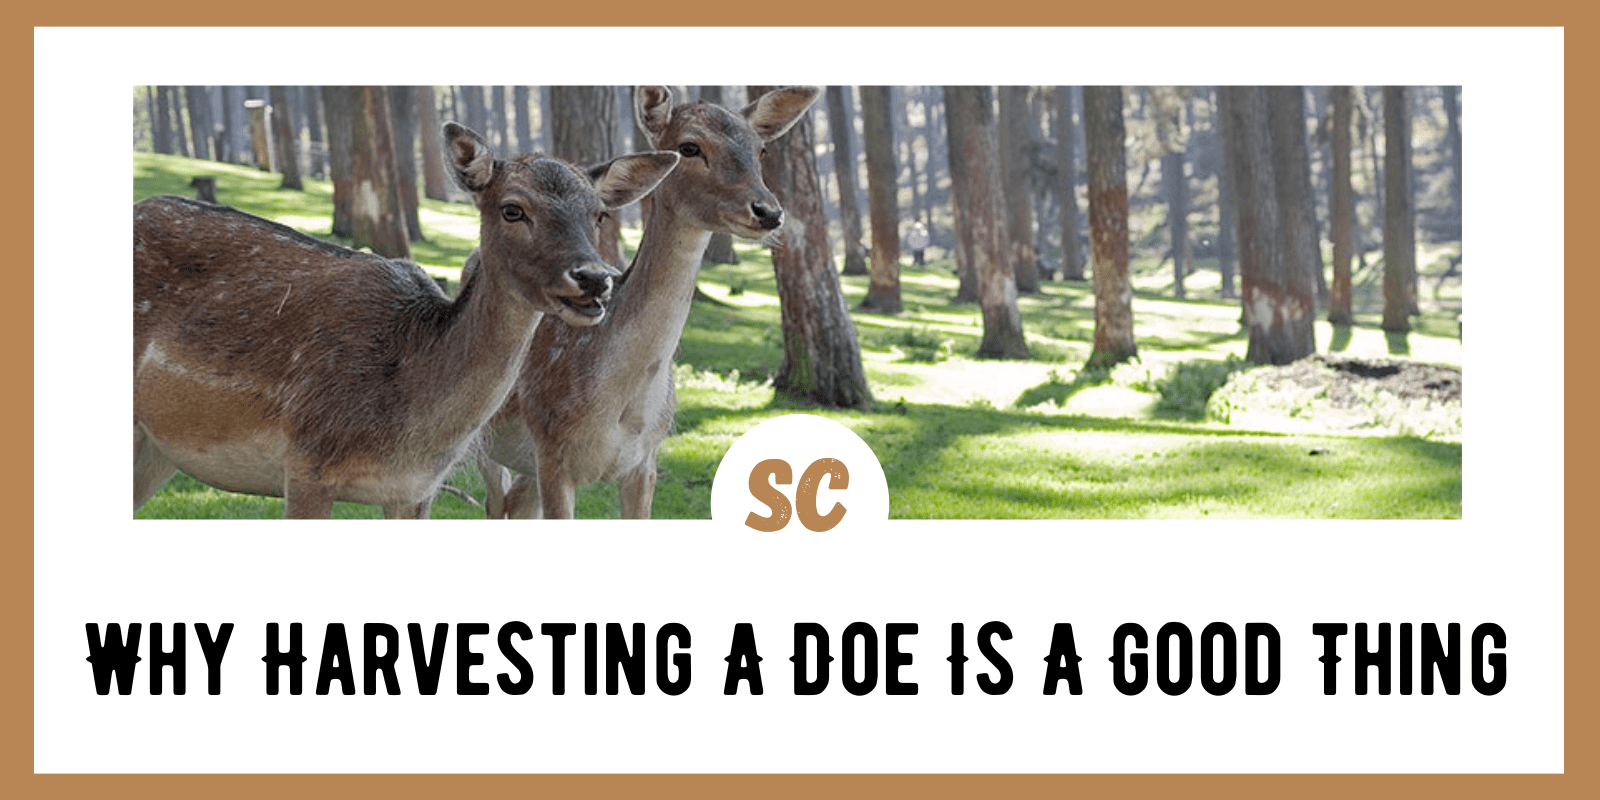 Why Harvesting A Doe Is A Good Thing